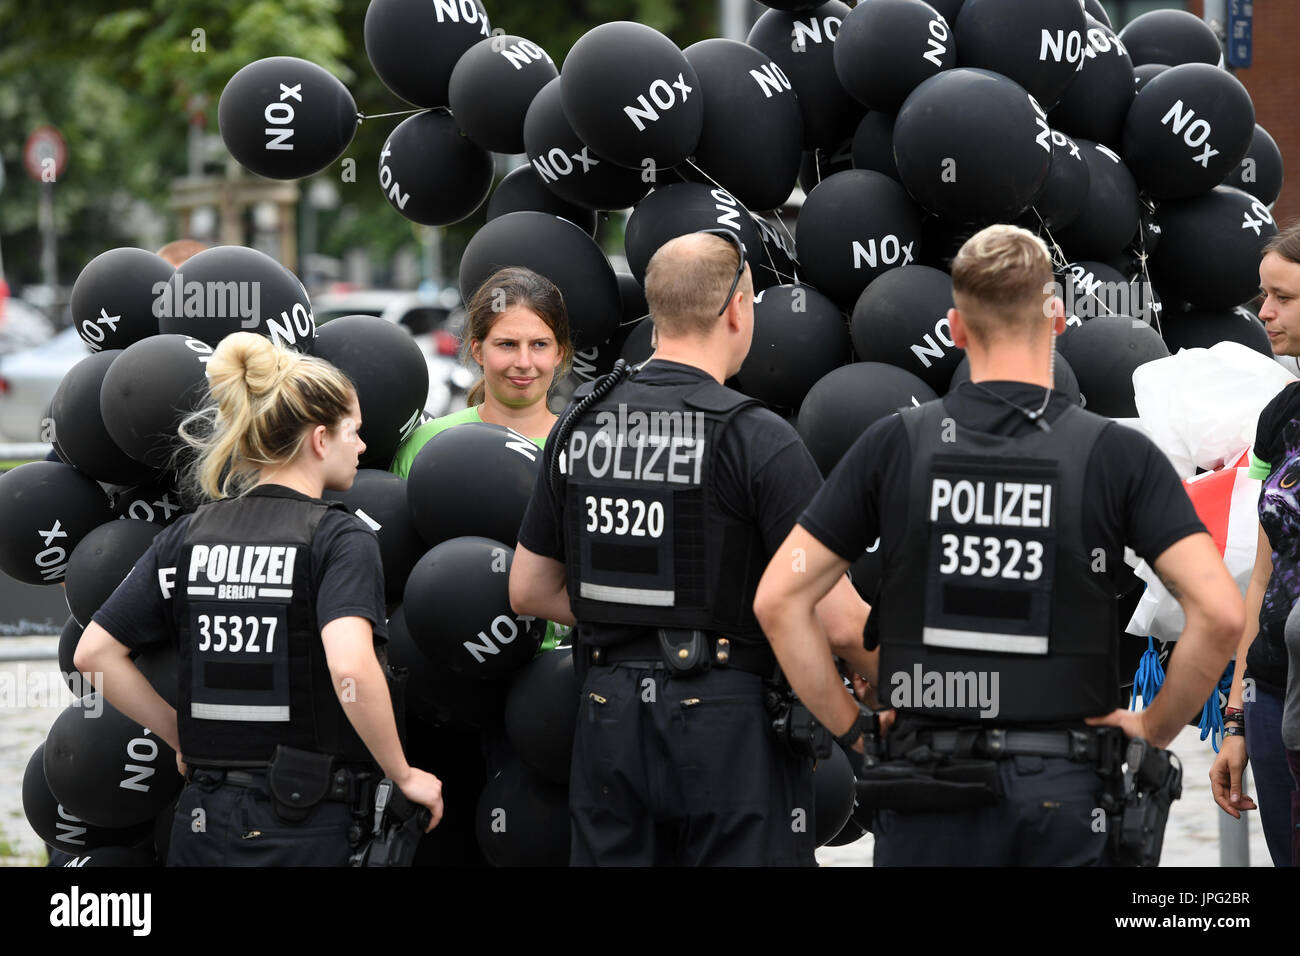 Berlin, Germany. 2nd Aug, 2017. Greenpeace activists protest in front of the Ministry of Transport after a summit on diesel and the reduction of harmful emmissions on August 2, 2017 in Berlin, Germany. The abbreviation NOx on the balloons stands for nitrogen oxide, which is released in high concentration by some diesel motors. It can act as a respiratory poison. Credit: dpa picture alliance/Alamy Live News Stock Photo